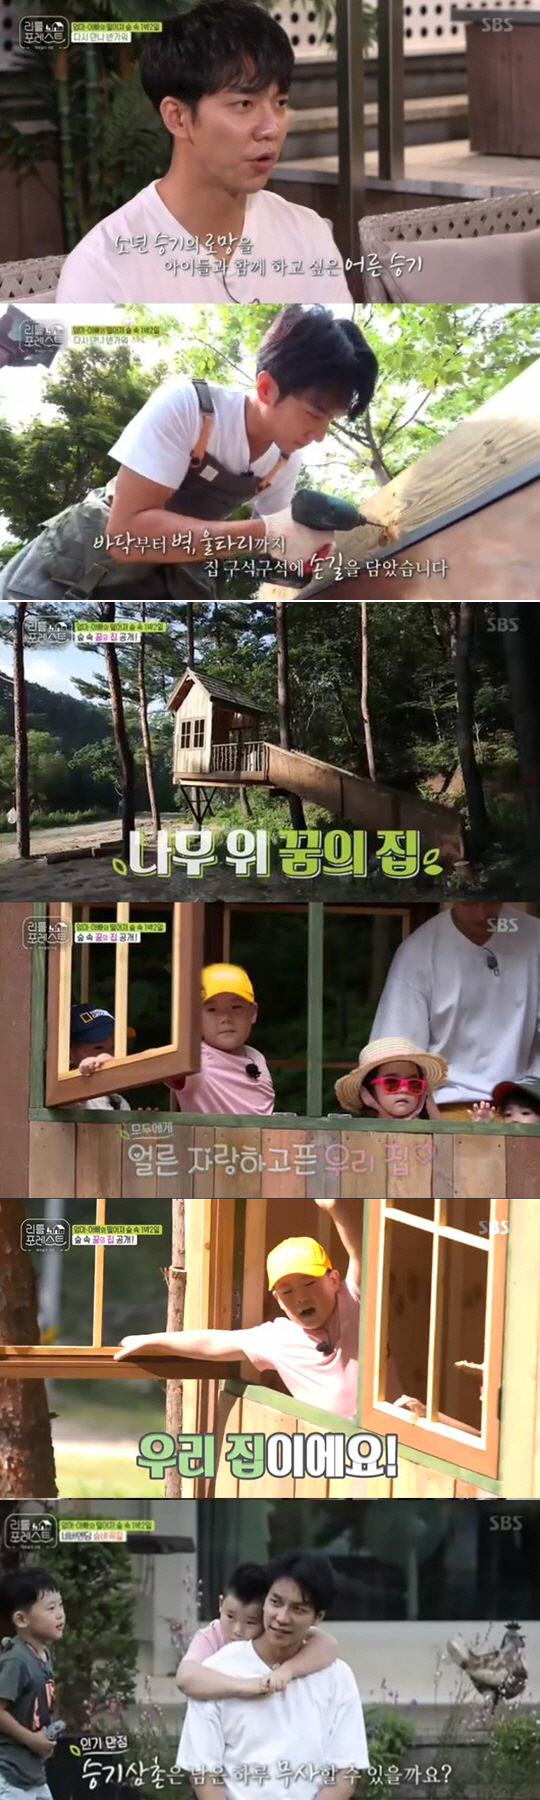 Little Forest Lee Seung-gi gave Littleies a dream house on a tree giftOn SBSs Little Forest broadcast on the 26th, the reunion of the caretakers (Lee Seo-jin Lee Seung-gi Park Na-rae Jung So-min) and Little Lee was broadcast.Jung So-min and Park Na-rae have a meal, Lee Seung-gi and Lee Seo-jin have a treehouse.Lee Seung-gi had previously introduced that House on Tree was a childhood romance: that he wanted to have a house built on a forest tree while watching a fairy tale like Peter Pan.Park Na-rae was surprised to say, Can you make it? But Lee Seung-gi learned woodworking directly at the woodworking office and then built a foundation for a month to complete it.Treehouse was also used by Lee Seung-gi to turn the attention of Littles in the situation where all blueberries fell due to rain.Littles were houses built by my uncle. In the meantime, others prepared seafood arancini, shrimp fries, and pumpkin soup for Littles.On this day, Grace and Brooke impressed the carers with their own drawings and letters: Jung So-min answered with a hug, and Lee Seung-gi, along with the impression, said, What did you draw?Kim Jin-hee joined the team in addition to the existing Little Lees, including Eugene and Han.Kim Jin-hee competed with his one-year-old brother Han with spinach, broccoli, and heavy loads, and also showed off his energy by helping him to make a prize.After the meal, Littles ran, shouting, The tree house is all over. Lee Seung-gi laughed proudly as the Littles cheered.The children brought stones and heavy logs to decorate the treehouse together, and ate watermelons together and called Dokdo is our land.But Lee Seung-gis pride was a moment, and in the endless hide-and-seek that followed the run with Little, Lee Seung-gi was exhausted and exhausted, thus reducing the greatness of child care.